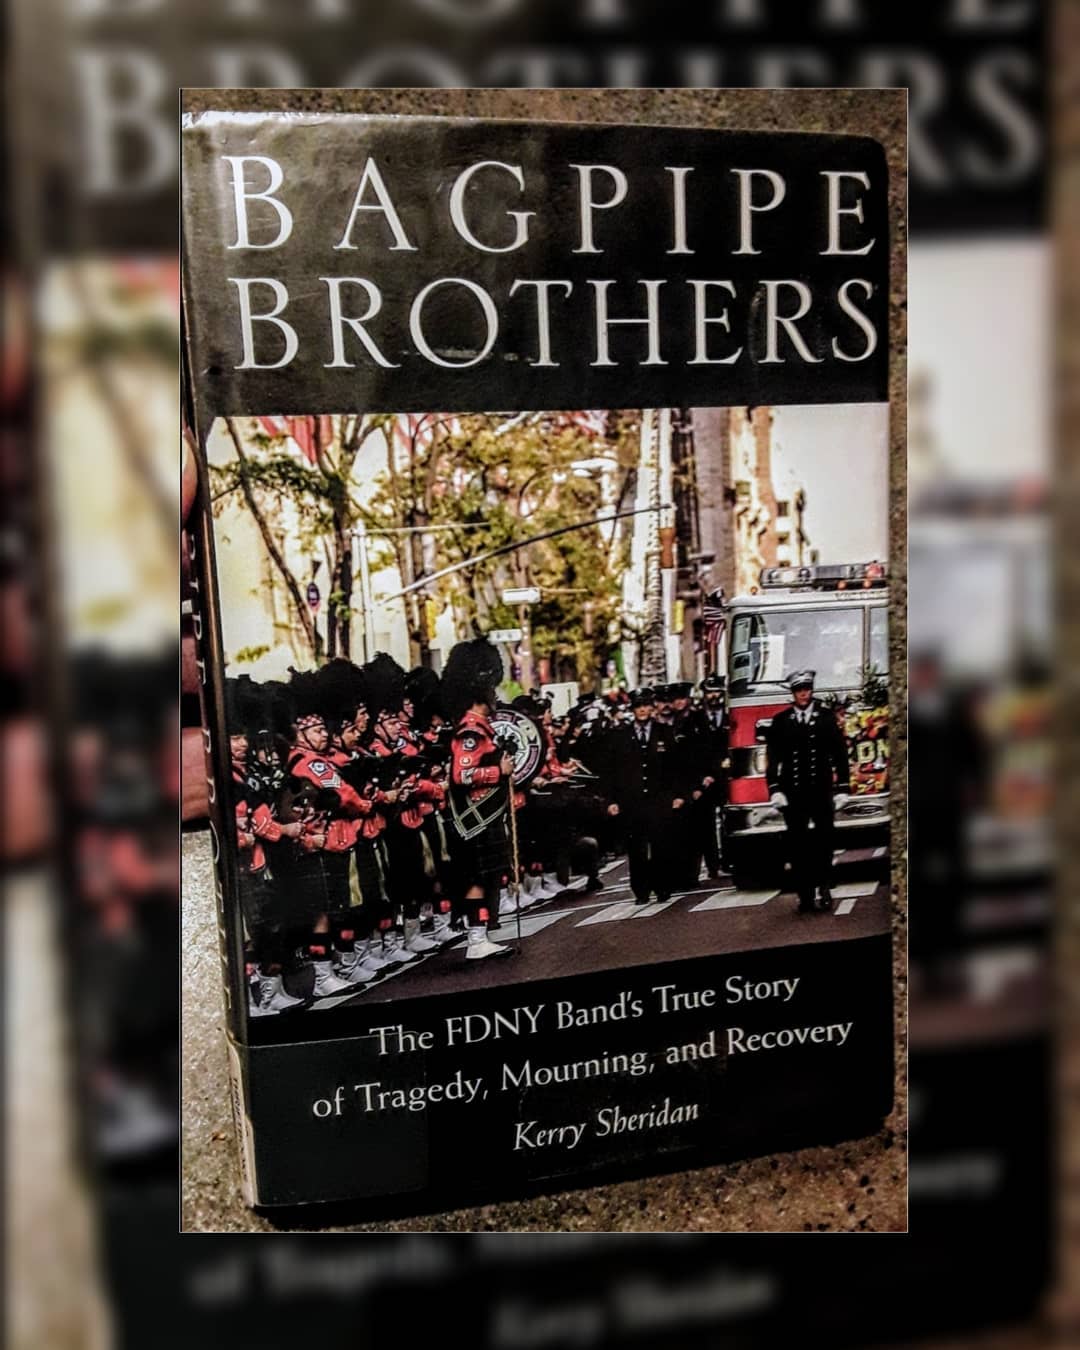 Bagpipe Brothers-A story of the FDNY Emerald society and the aftermath of 9/11 attacks on New York